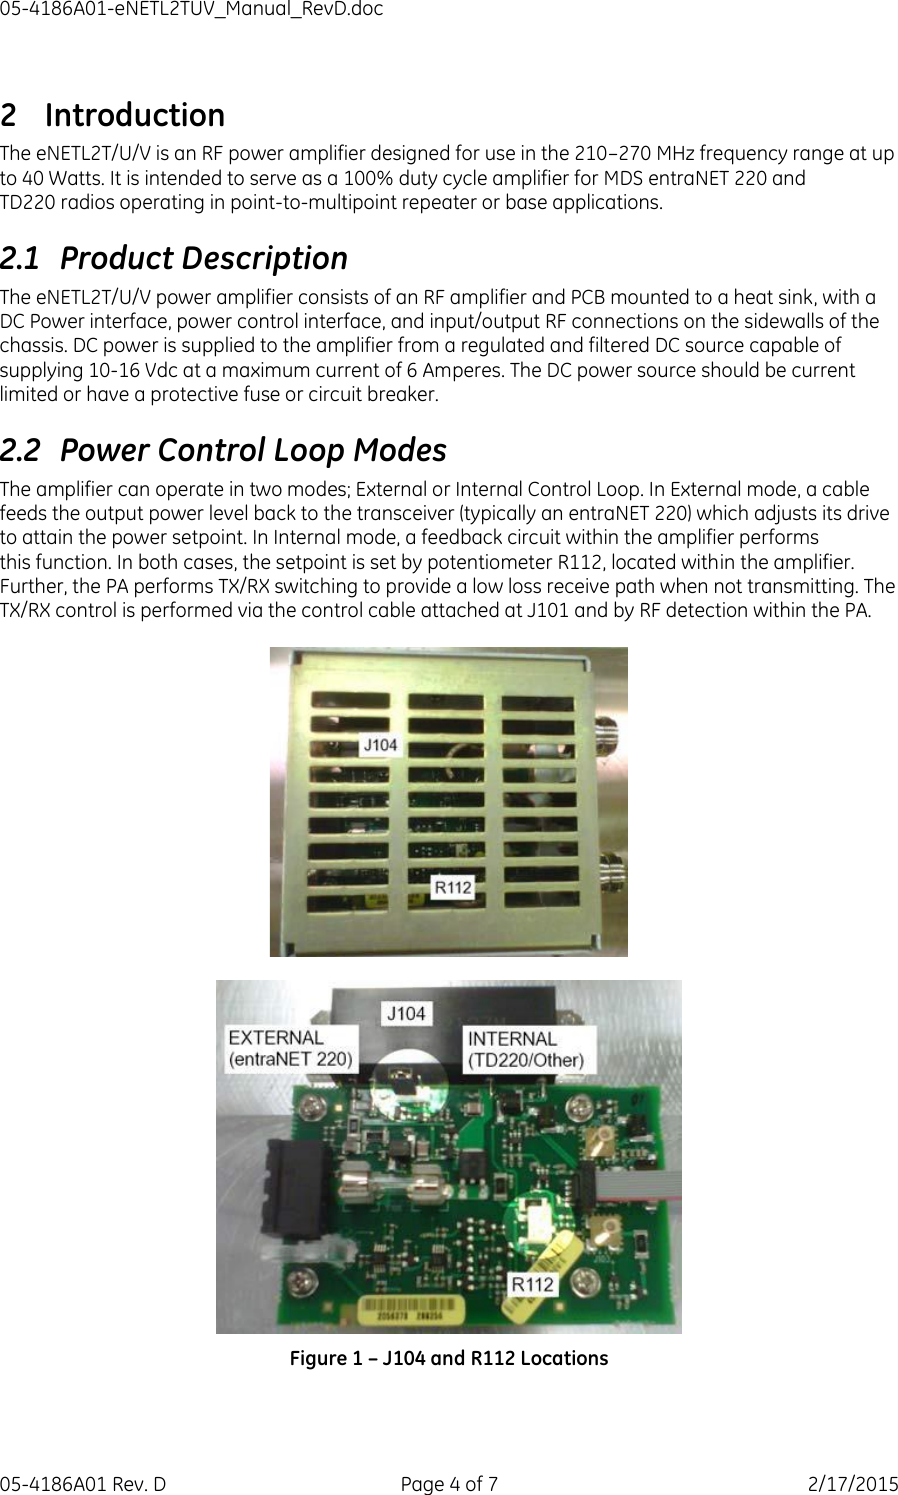 05-4186A01-eNETL2TUV_Manual_RevD.doc 05-4186A01 Rev. D  Page 4 of 7  2/17/2015 2 Introduction The eNETL2T/U/V is an RF power amplifier designed for use in the 210–270 MHz frequency range at up to 40 Watts. It is intended to serve as a 100% duty cycle amplifier for MDS entraNET 220 and TD220 radios operating in point-to-multipoint repeater or base applications. 2.1 Product Description The eNETL2T/U/V power amplifier consists of an RF amplifier and PCB mounted to a heat sink, with a DC Power interface, power control interface, and input/output RF connections on the sidewalls of the chassis. DC power is supplied to the amplifier from a regulated and filtered DC source capable of supplying 10-16 Vdc at a maximum current of 6 Amperes. The DC power source should be current limited or have a protective fuse or circuit breaker. 2.2 Power Control Loop Modes The amplifier can operate in two modes; External or Internal Control Loop. In External mode, a cable feeds the output power level back to the transceiver (typically an entraNET 220) which adjusts its drive to attain the power setpoint. In Internal mode, a feedback circuit within the amplifier performs this function. In both cases, the setpoint is set by potentiometer R112, located within the amplifier. Further, the PA performs TX/RX switching to provide a low loss receive path when not transmitting. The TX/RX control is performed via the control cable attached at J101 and by RF detection within the PA.      Figure 1 – J104 and R112 Locations 